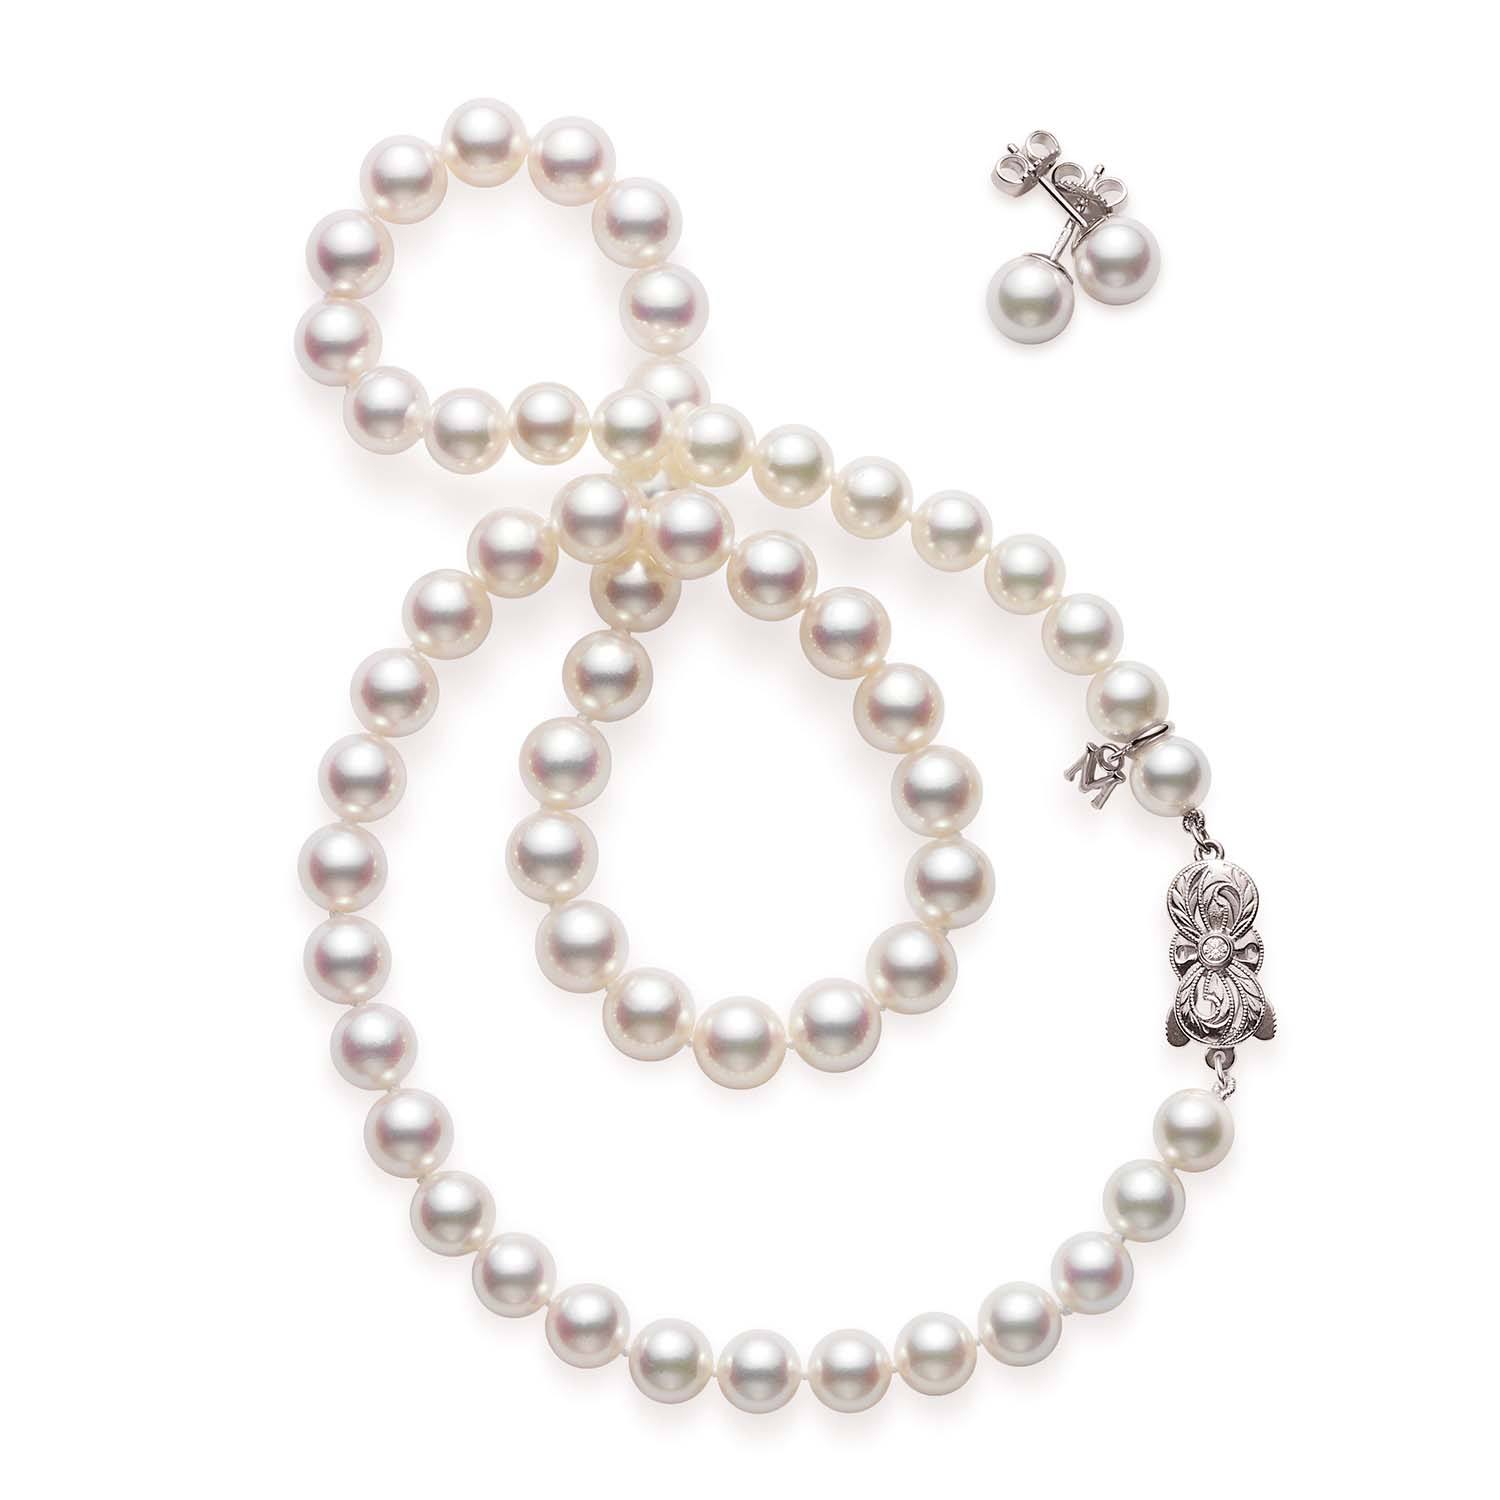 Mikimoto "A1" Akoya Cultured Pearl Two-Piece Gift Set 0